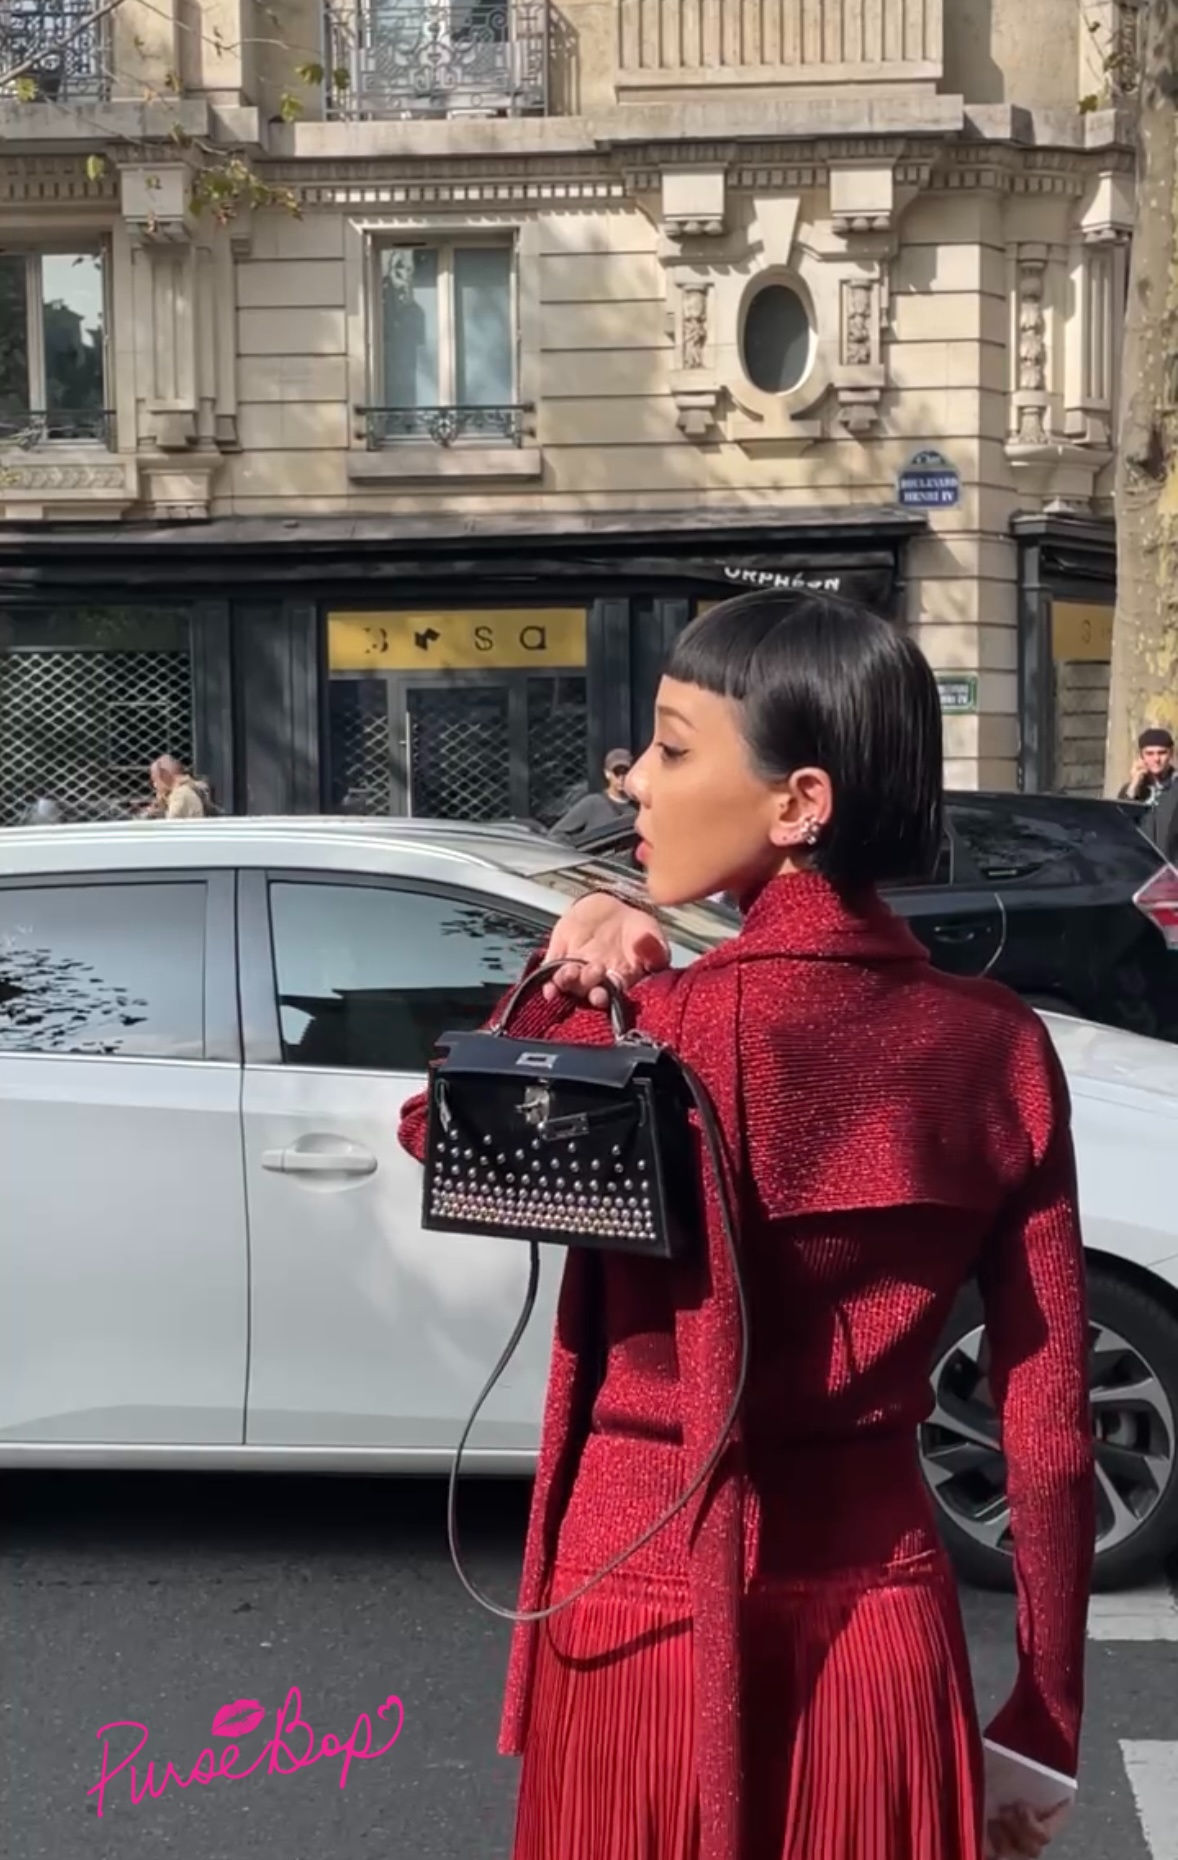 Aimee Song is seen on the street attending LOUIS VUITTON during Paris